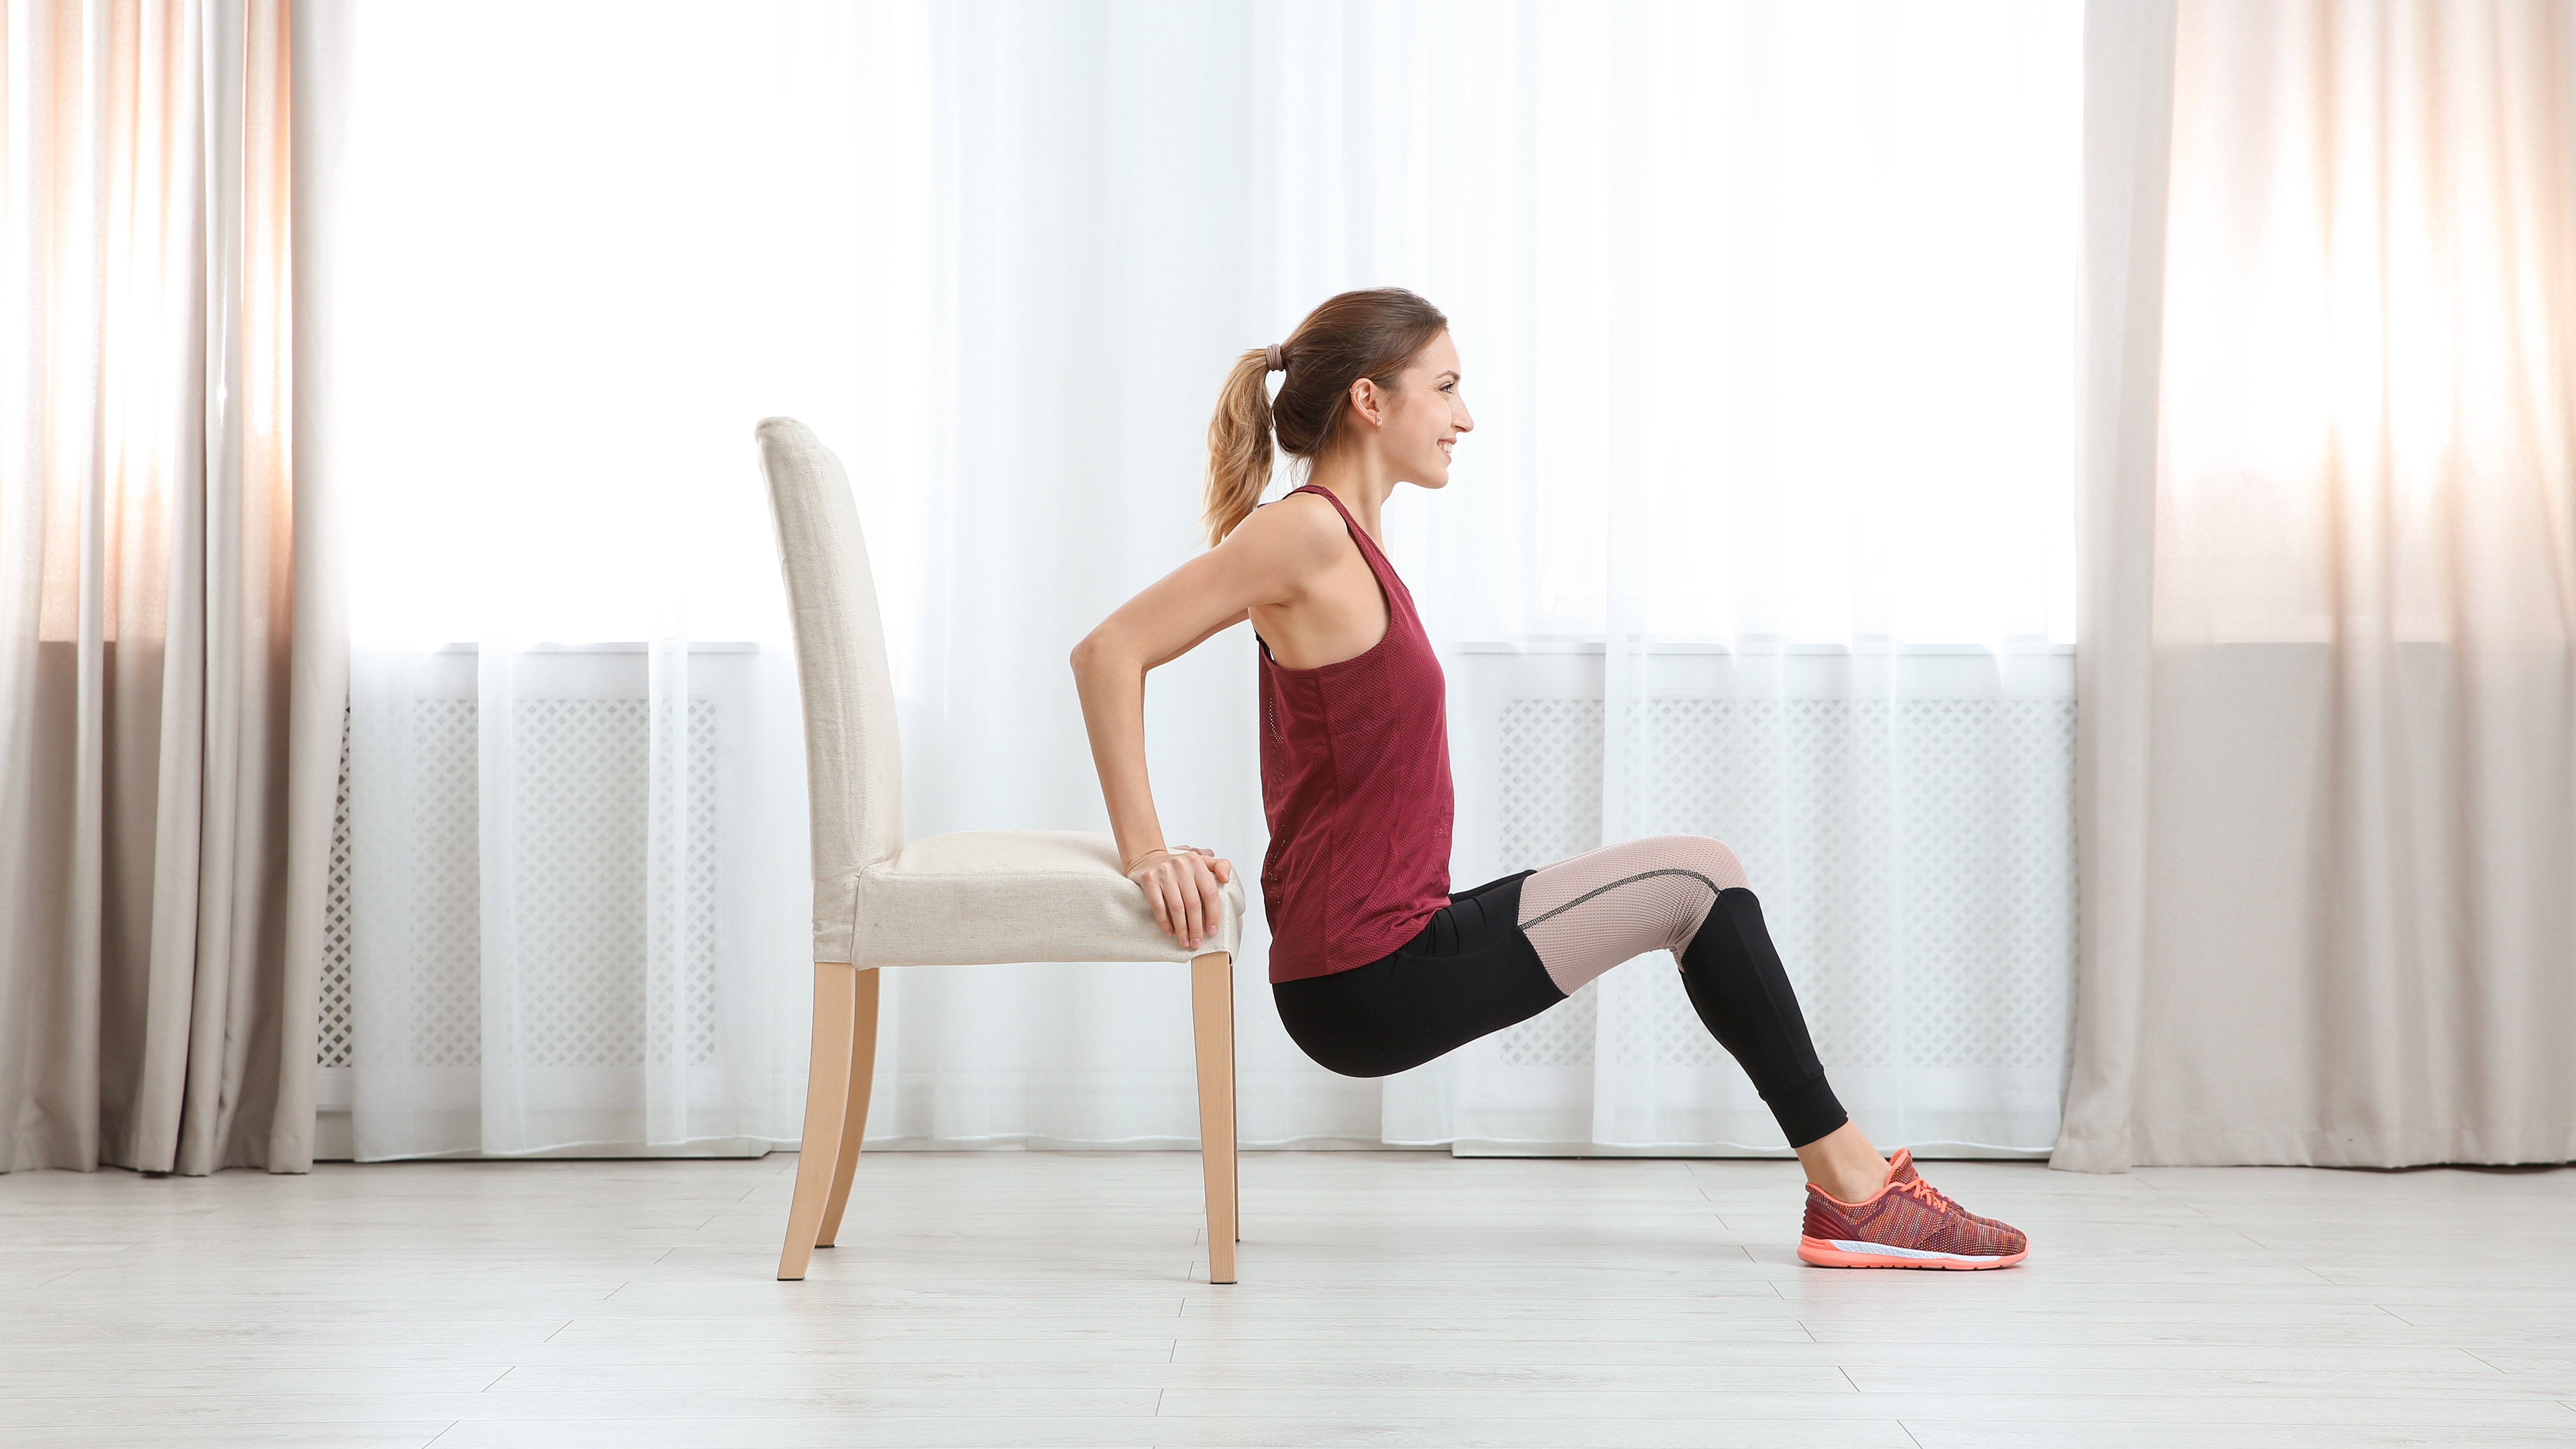 Six seated exercises to keep you limber at your desk